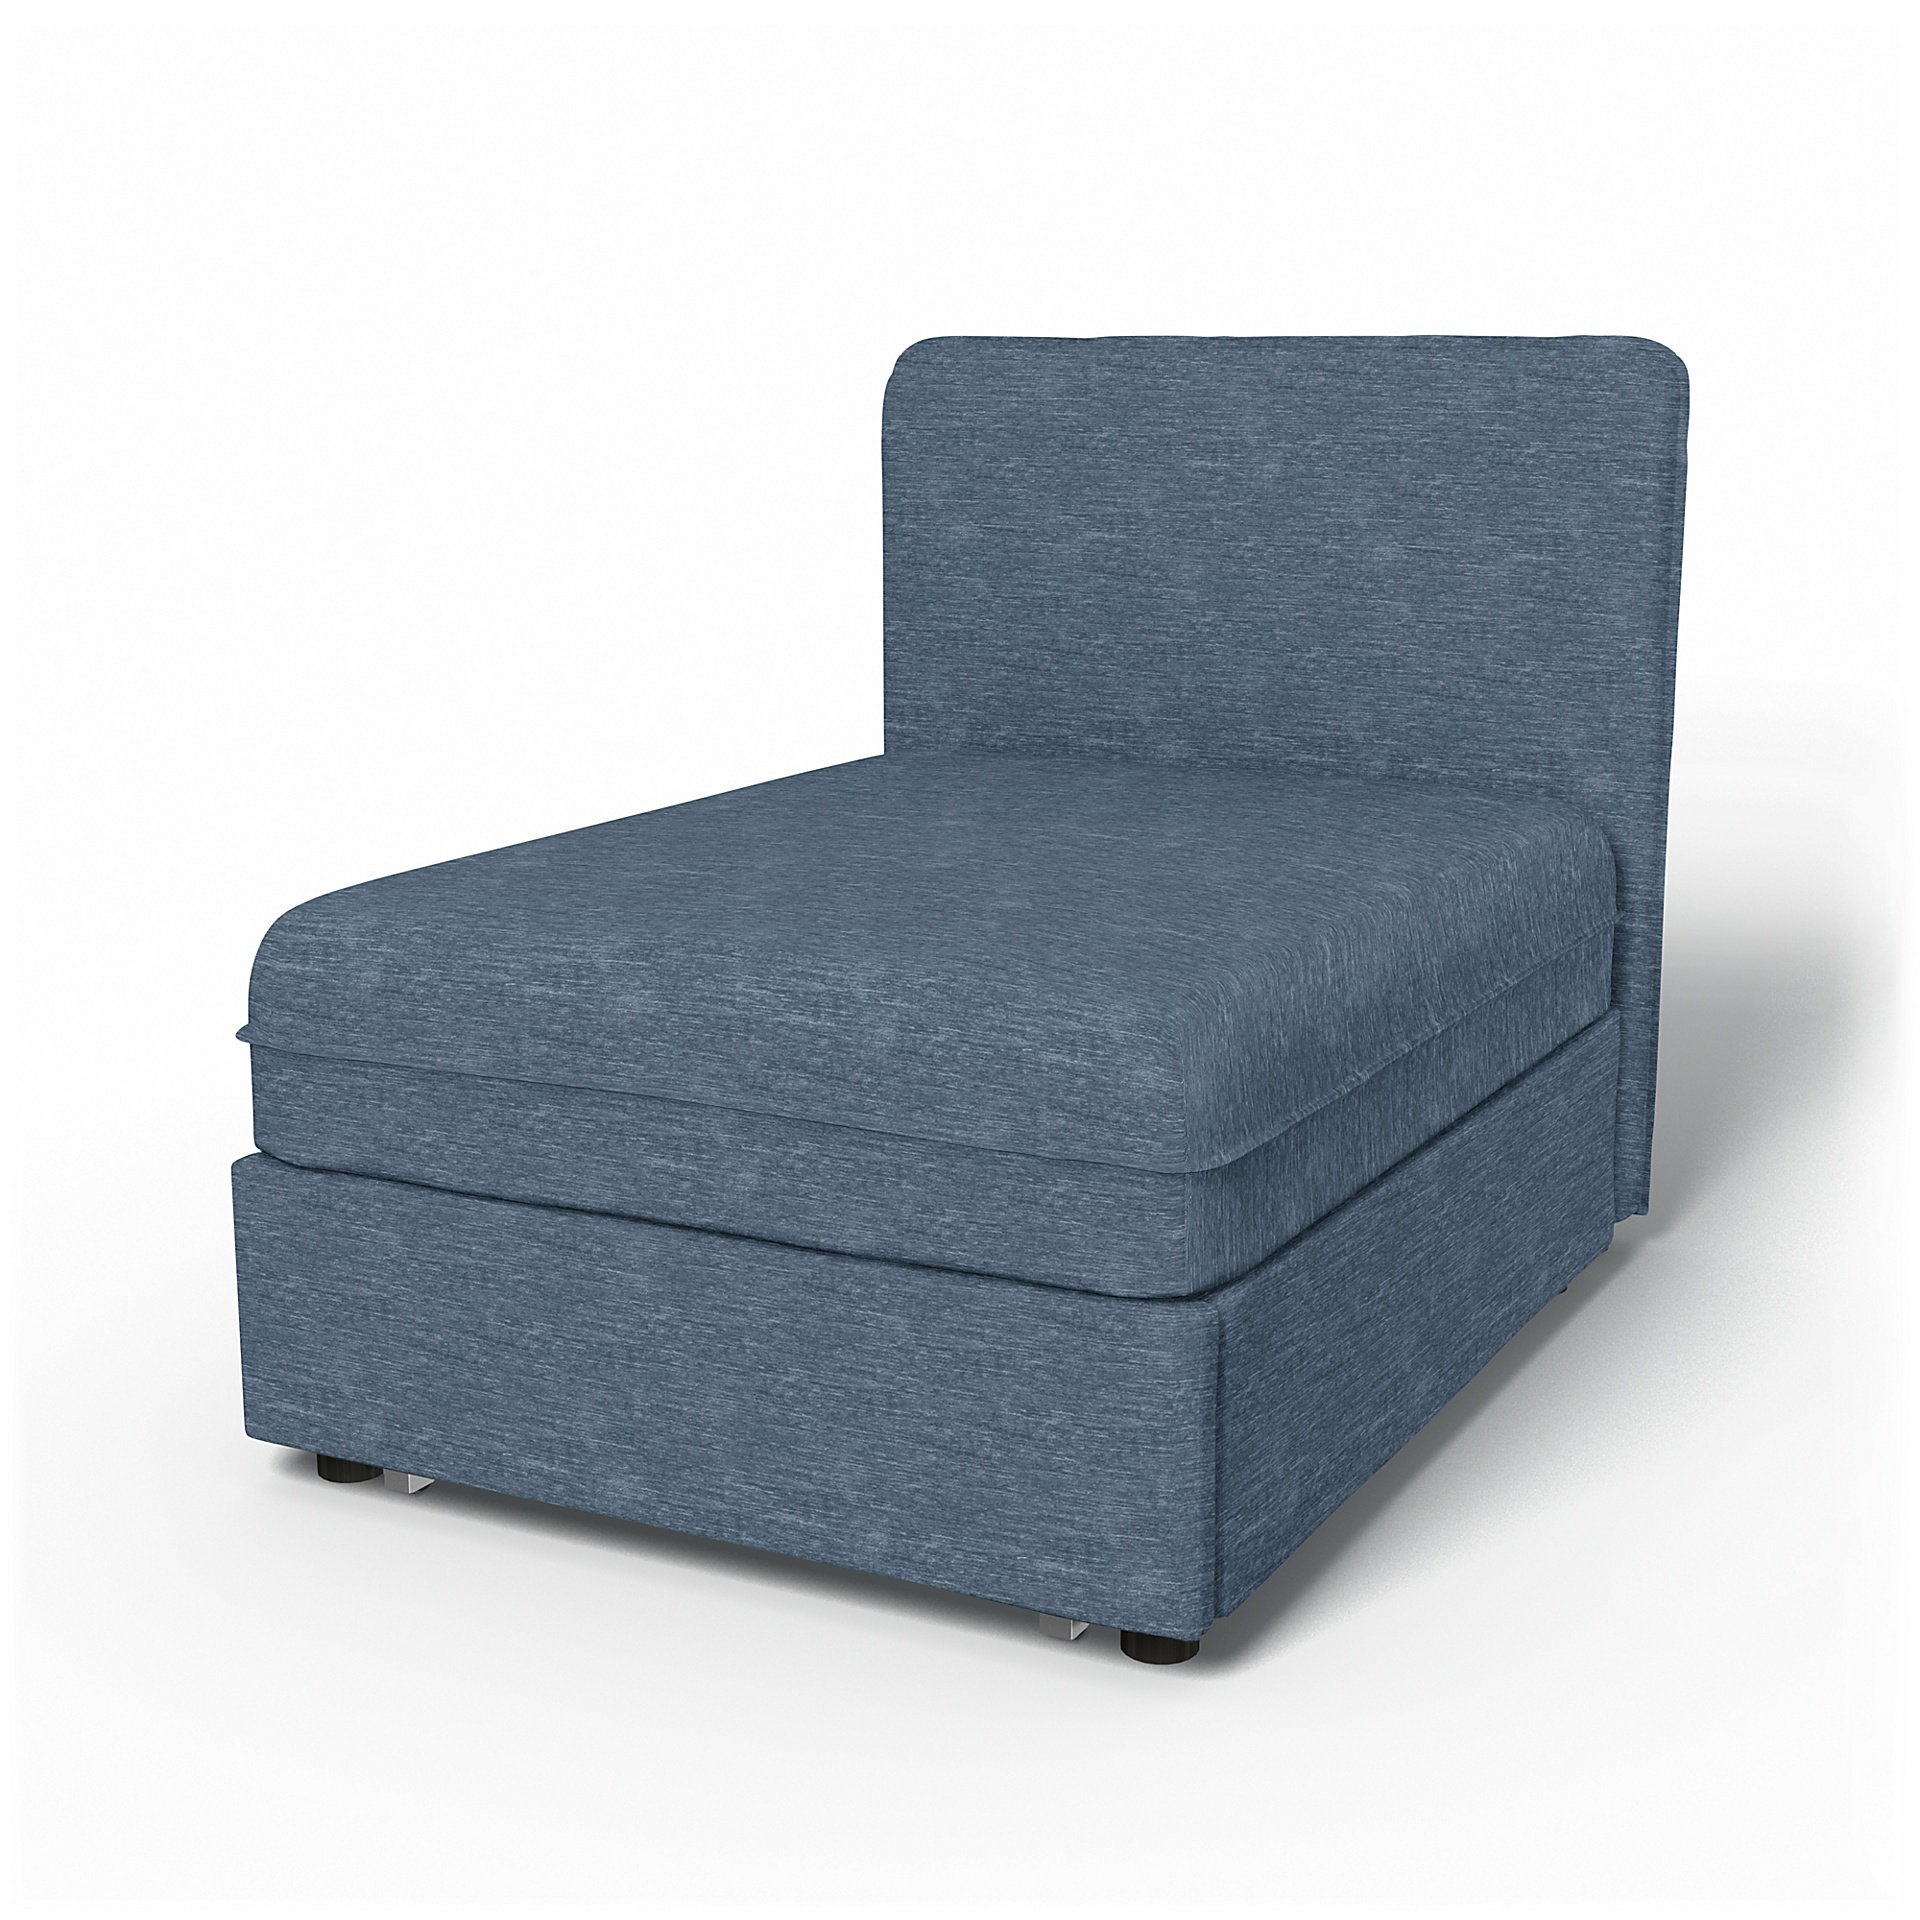 IKEA - Vallentuna Seat Module with Low Back Sofa Bed Cover 80x100 cm 32x39in, Mineral Blue, Velvet -